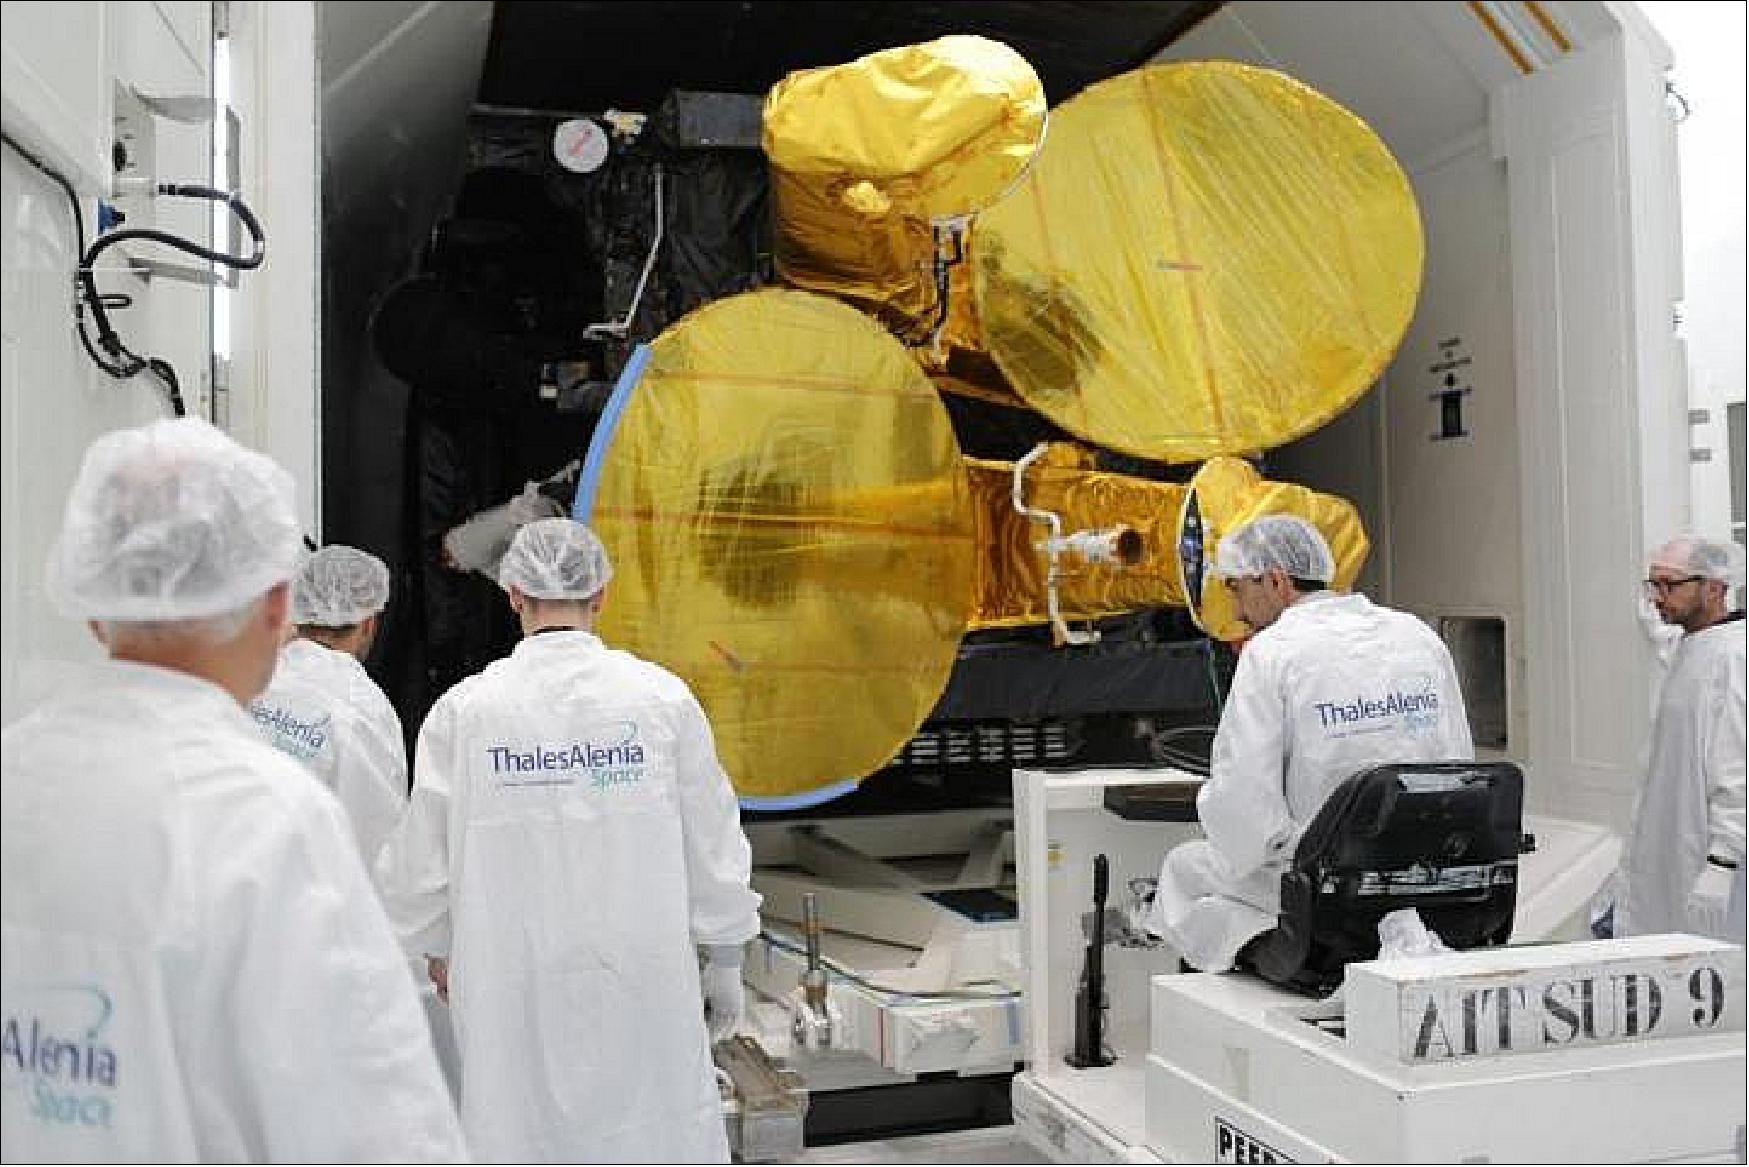 Figure 5: The Inmarsat S-band / Hellas-Sat 3 satellite being loaded for delivery to the Kourou launch facility in French Guyana (image credit: TAS)